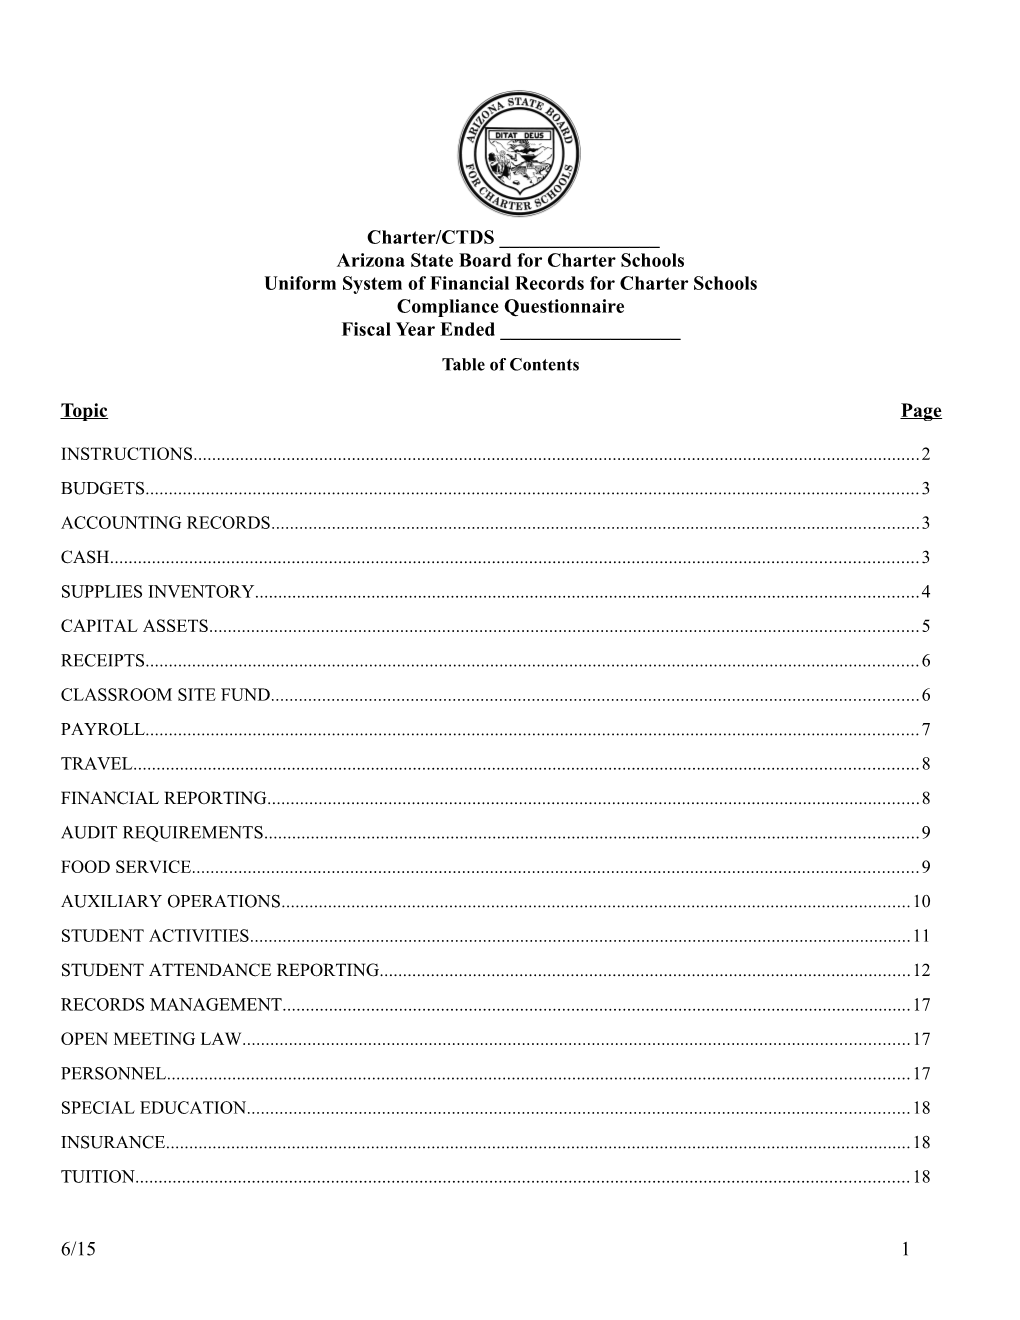 Uniform System of Financial Records for Charter Schools